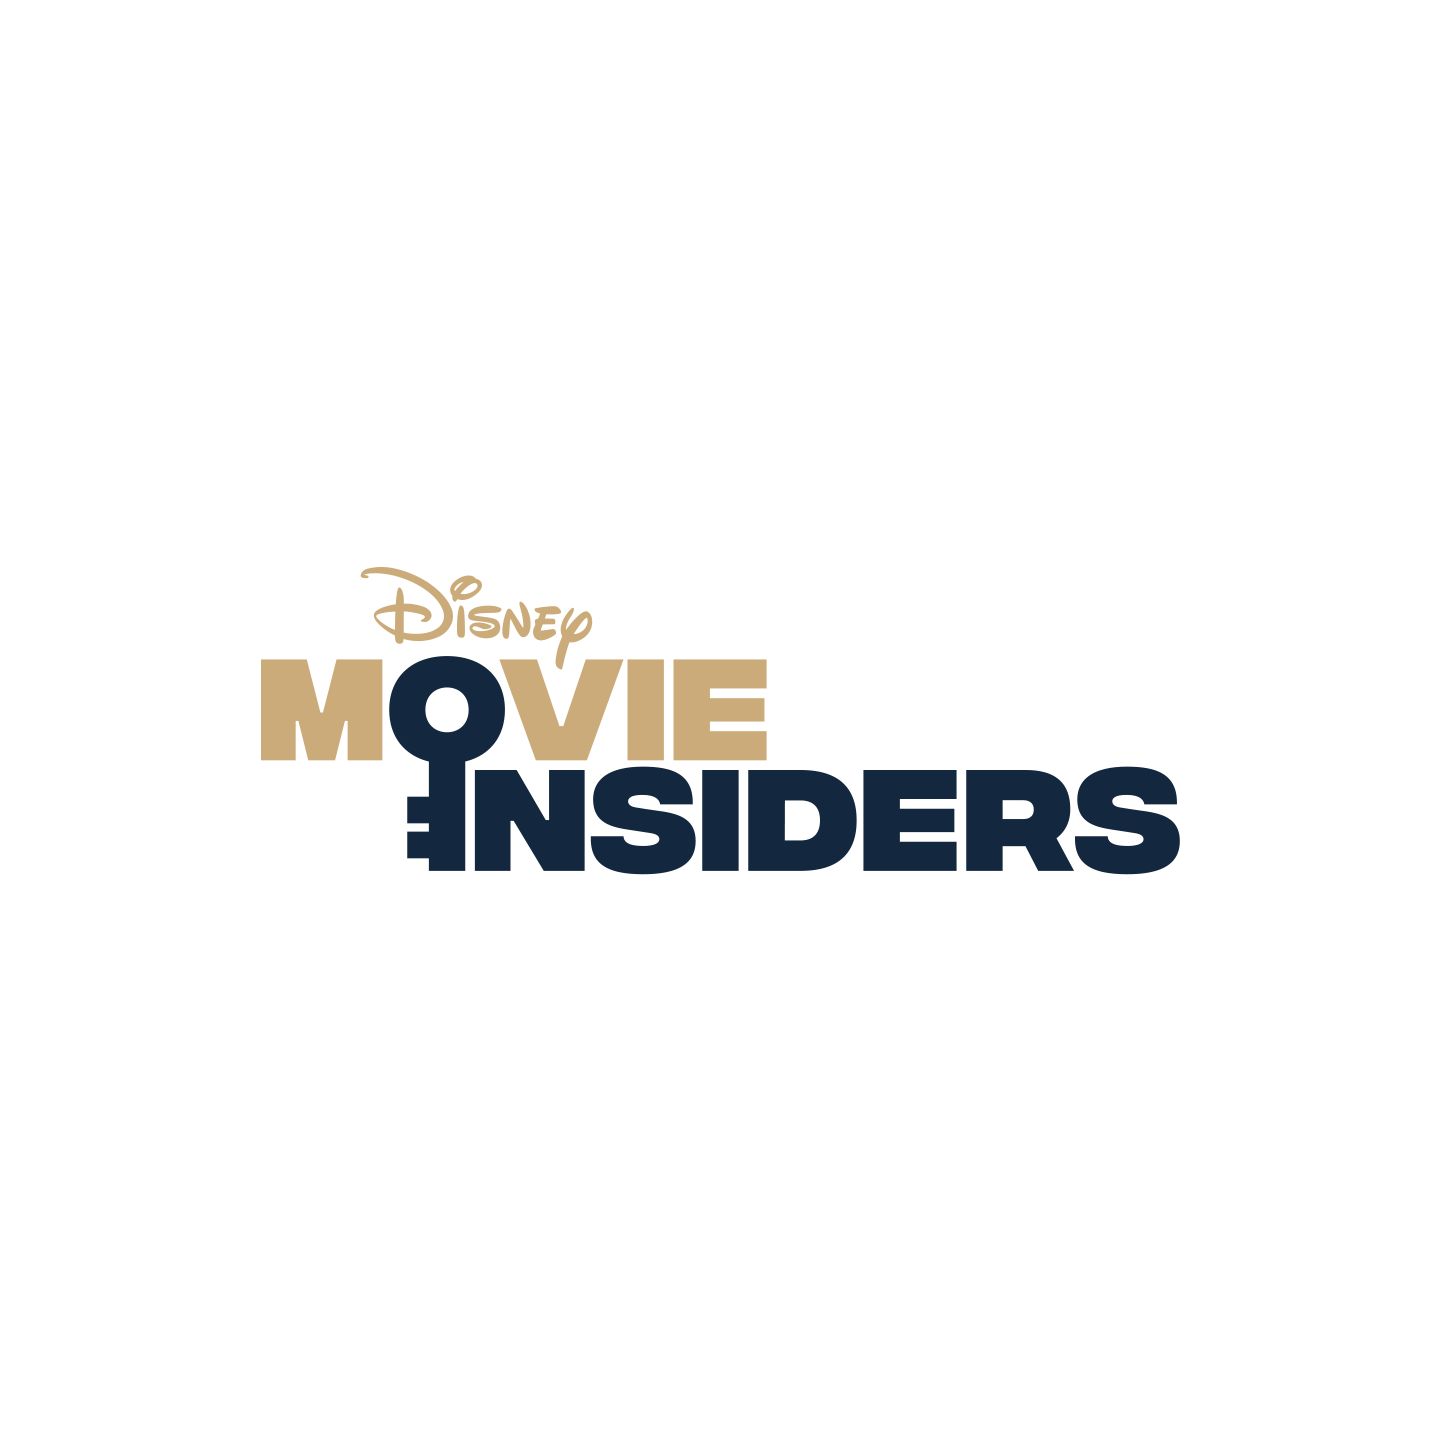 Disney | THE POWER OF JOY - Join Disney Movie Insiders as we celebrate the Power of Joy with fans at the ESSENCE Festival of Culture presented by Coca-Cola.